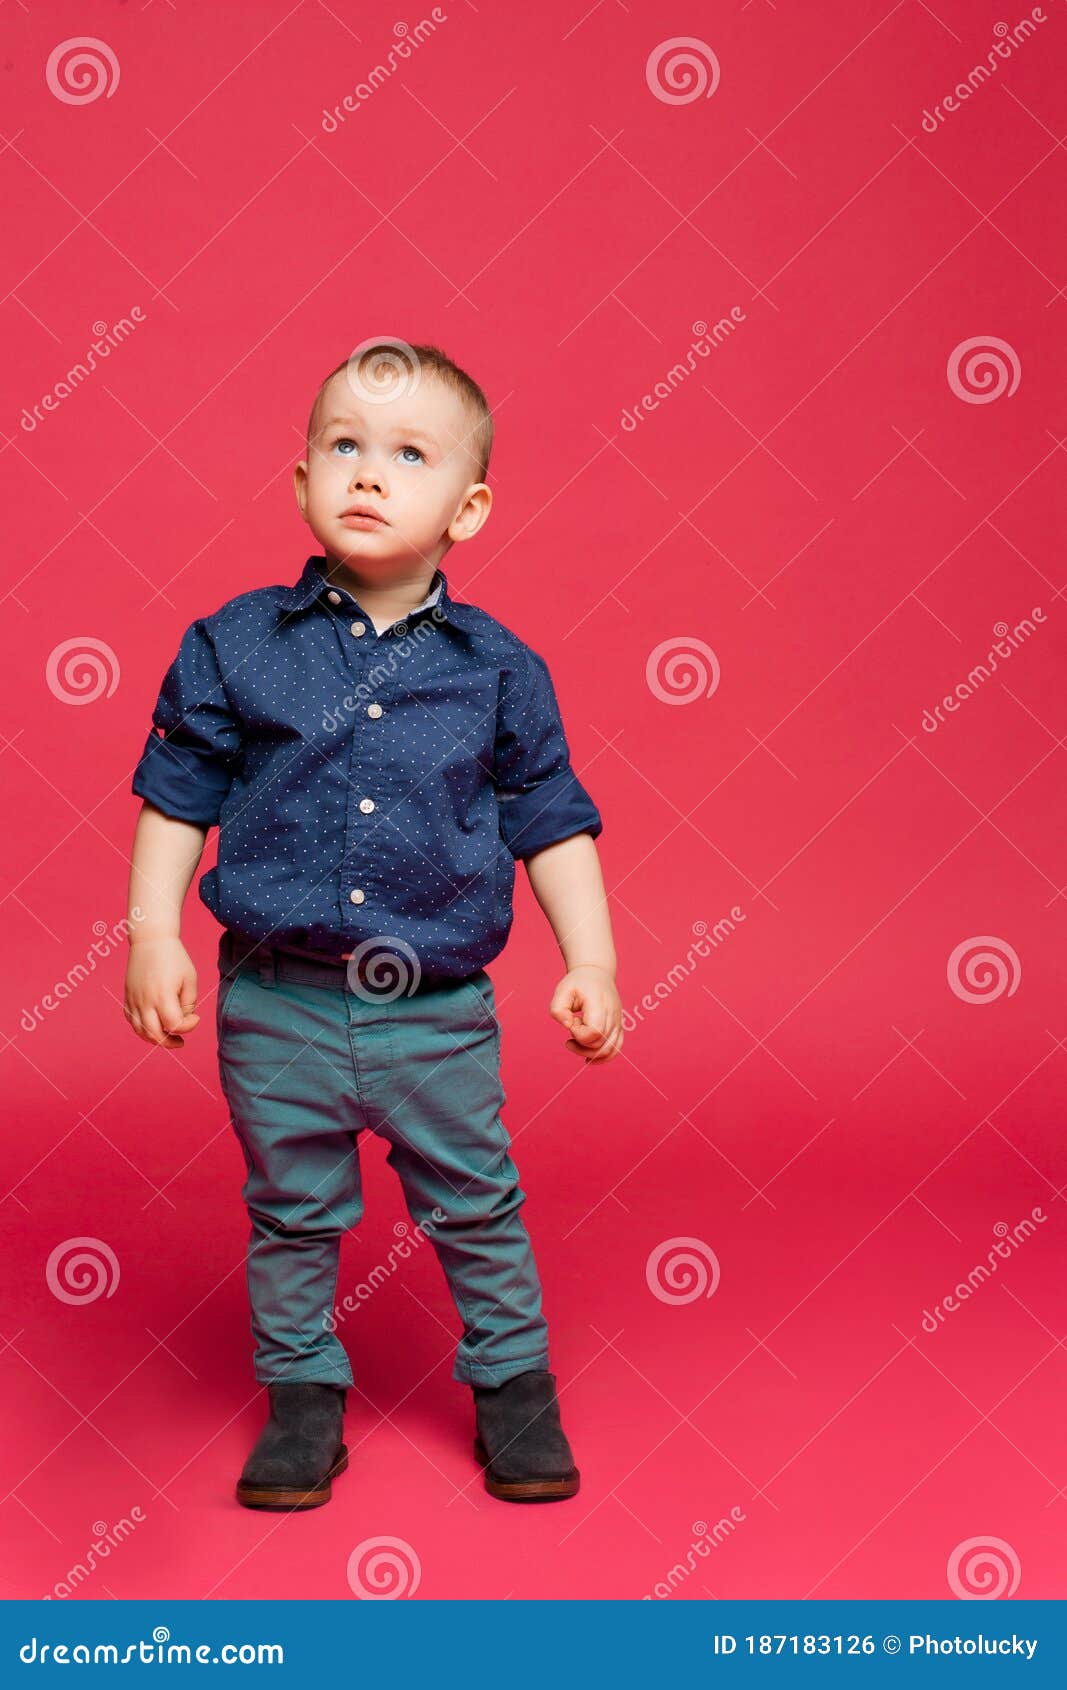 Stylish Little Boy Surprised Looking Up Playing at Studio. Stock Photo -  Image of casual, cheerful: 187183126